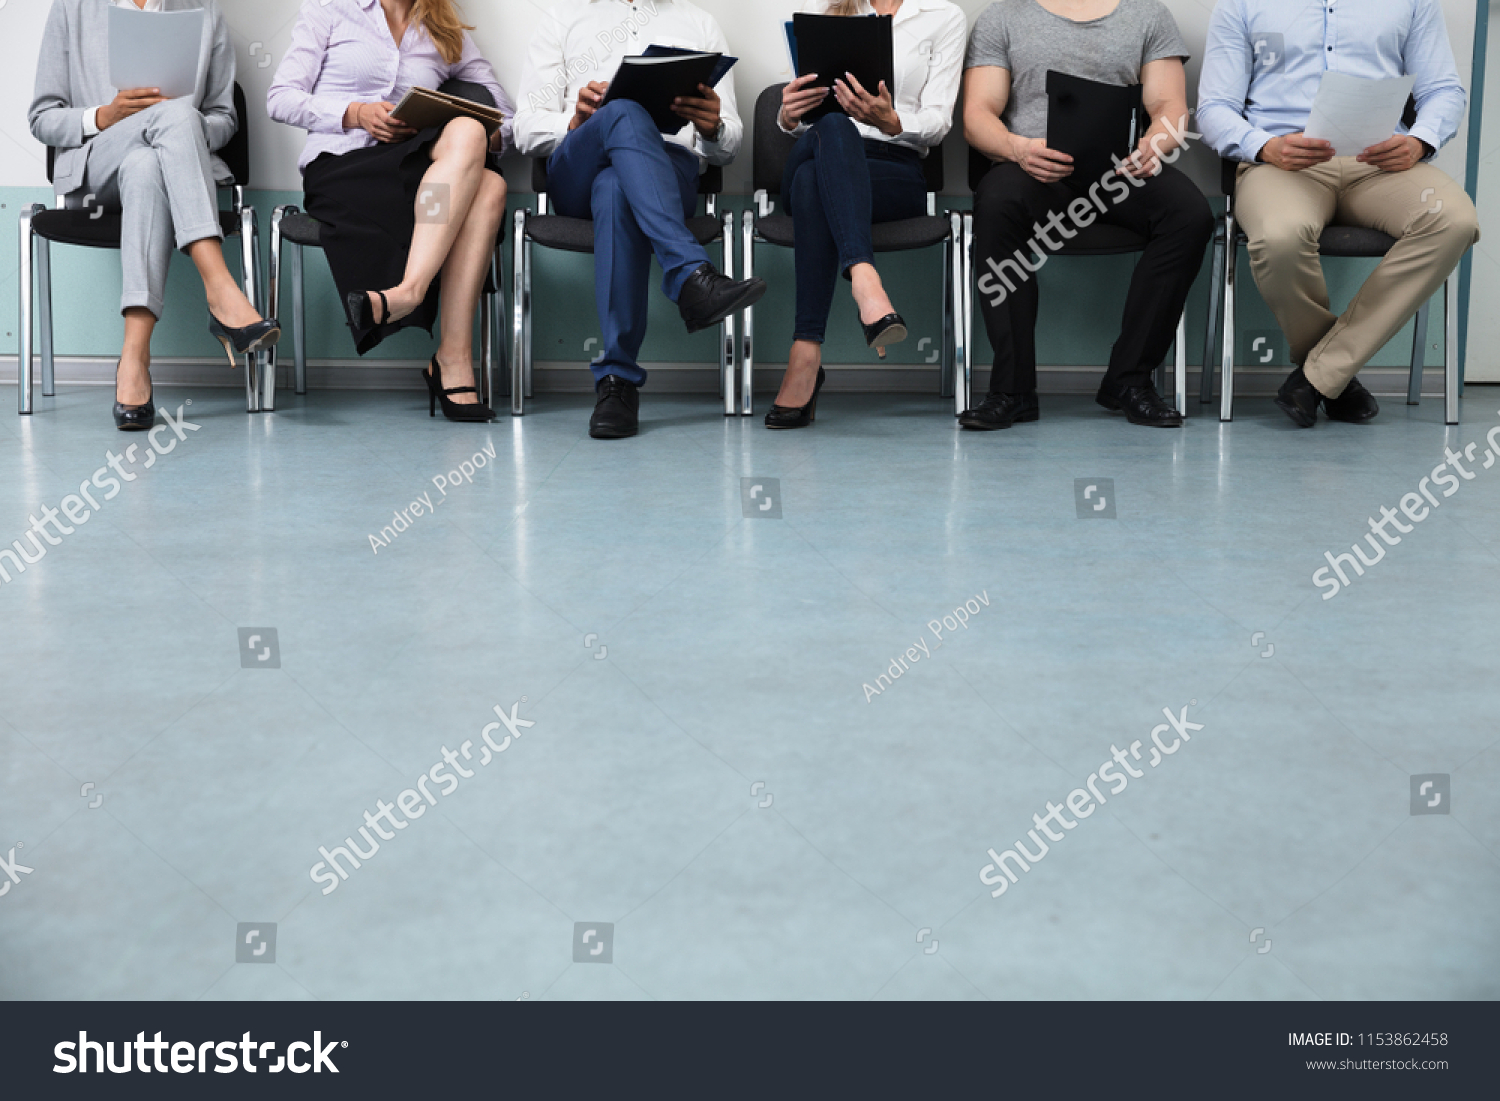 Row Of Candidates Sitting On Chair For Job Interview #1153862458